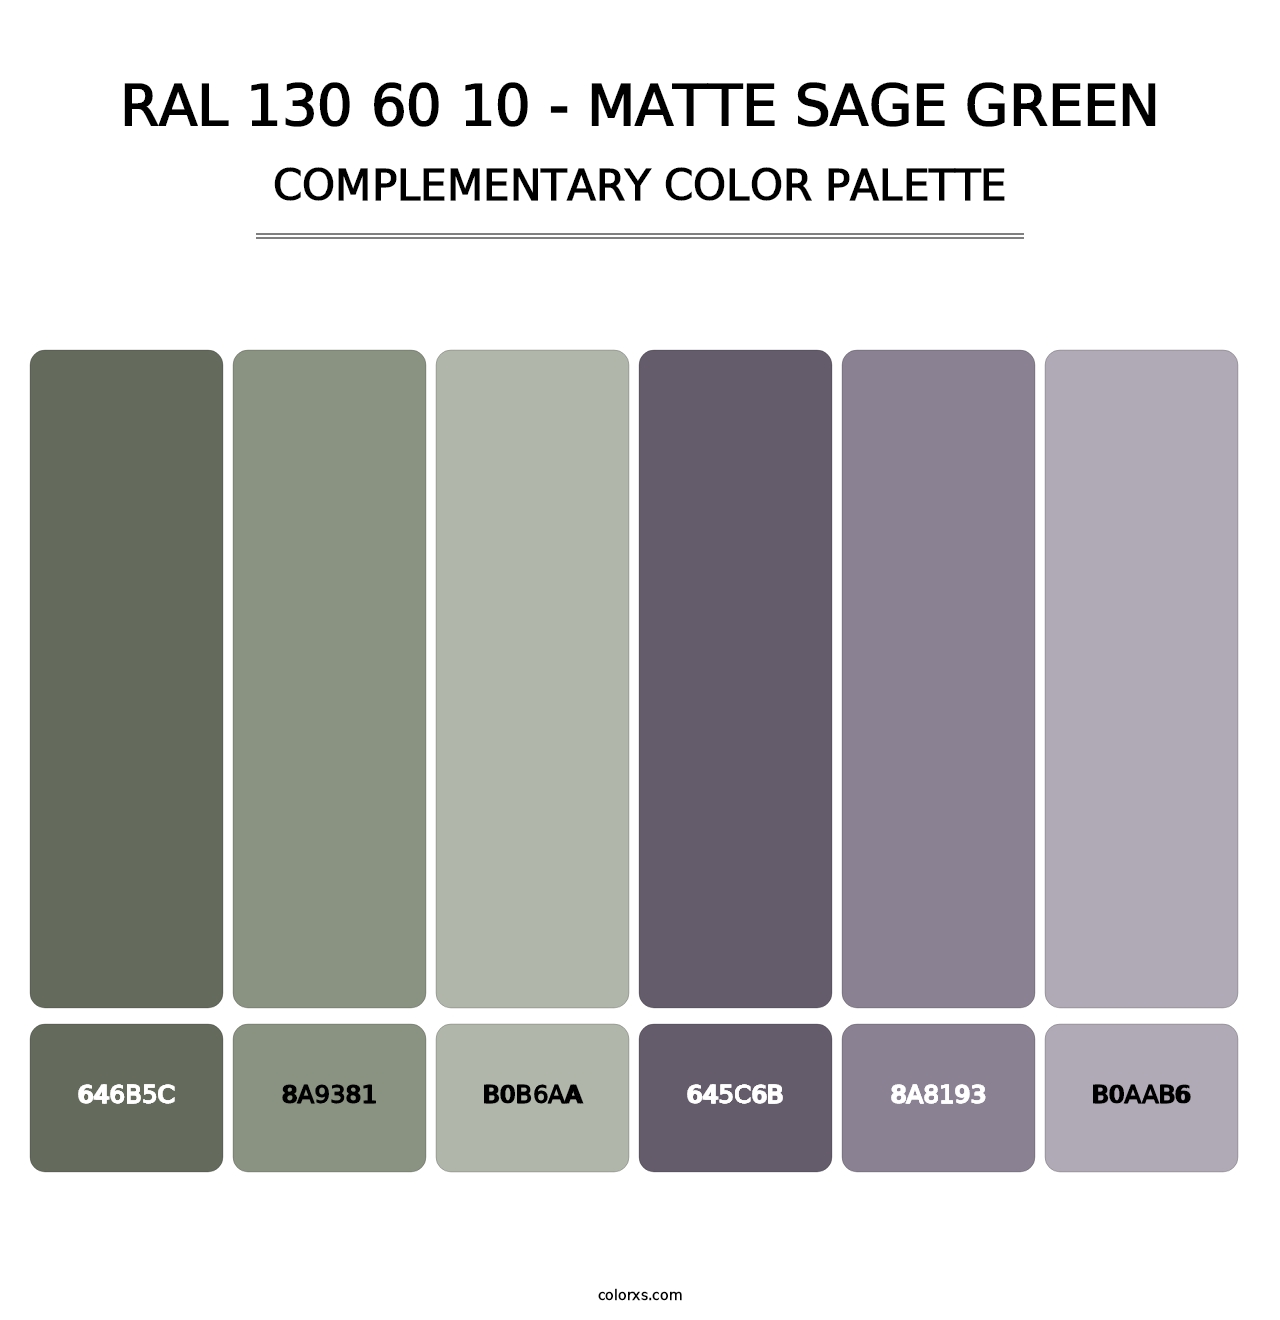 RAL 130 60 10 - Matte Sage Green - Complementary Color Palette